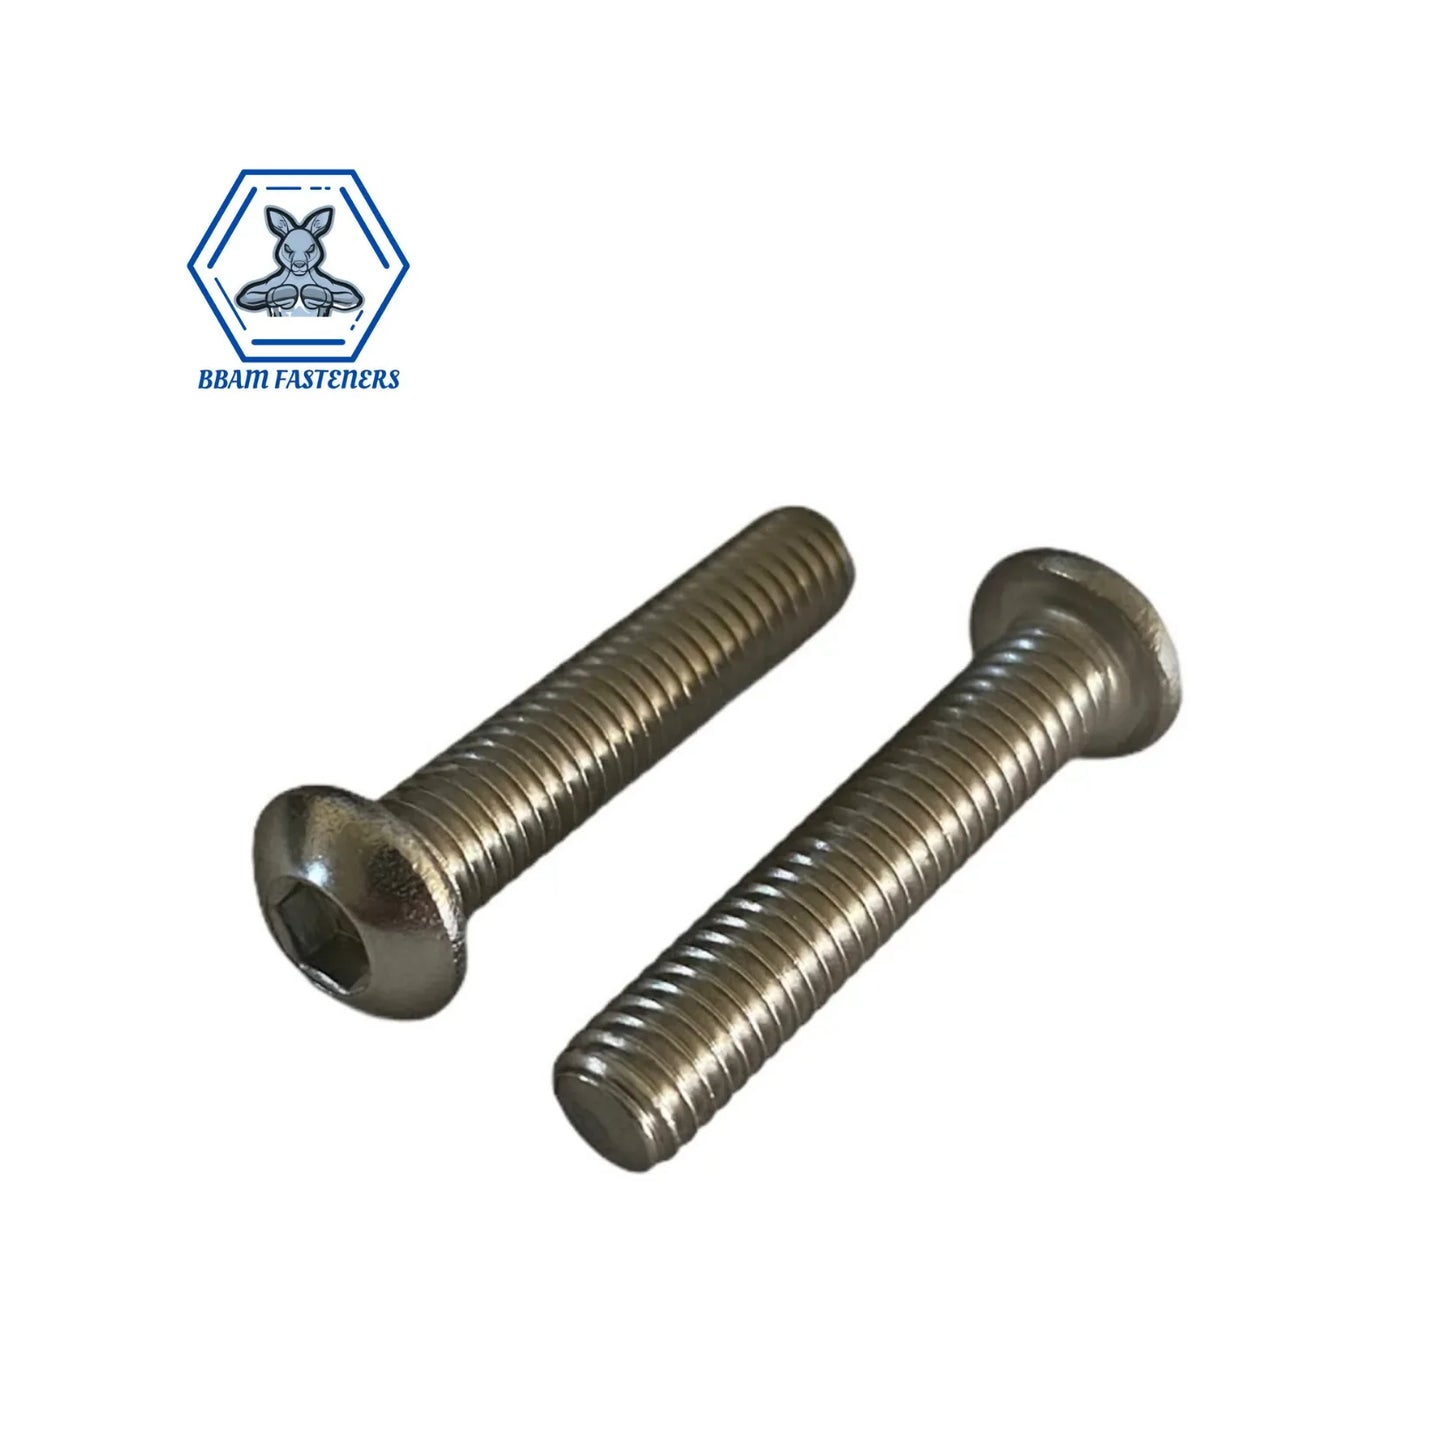 1/4" x 1/2" UNC Button Socket Screw 304 Stainless Steel